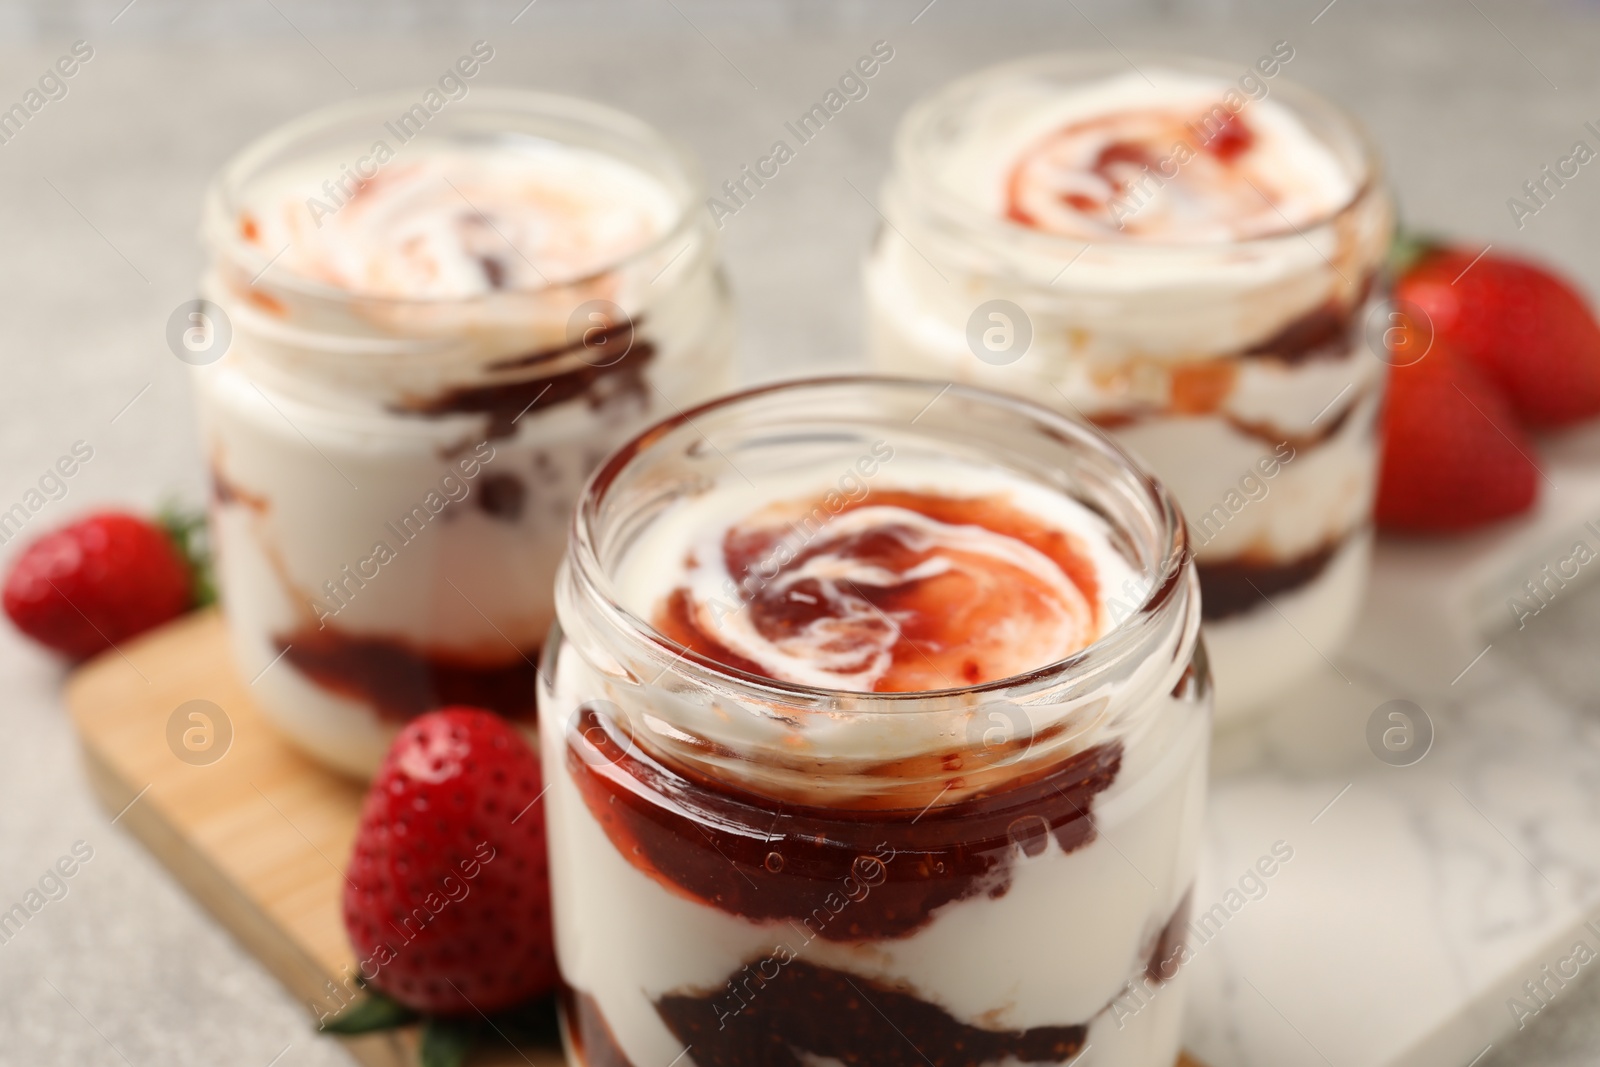 Photo of Tasty yoghurt with jam and strawberries on table, closeup